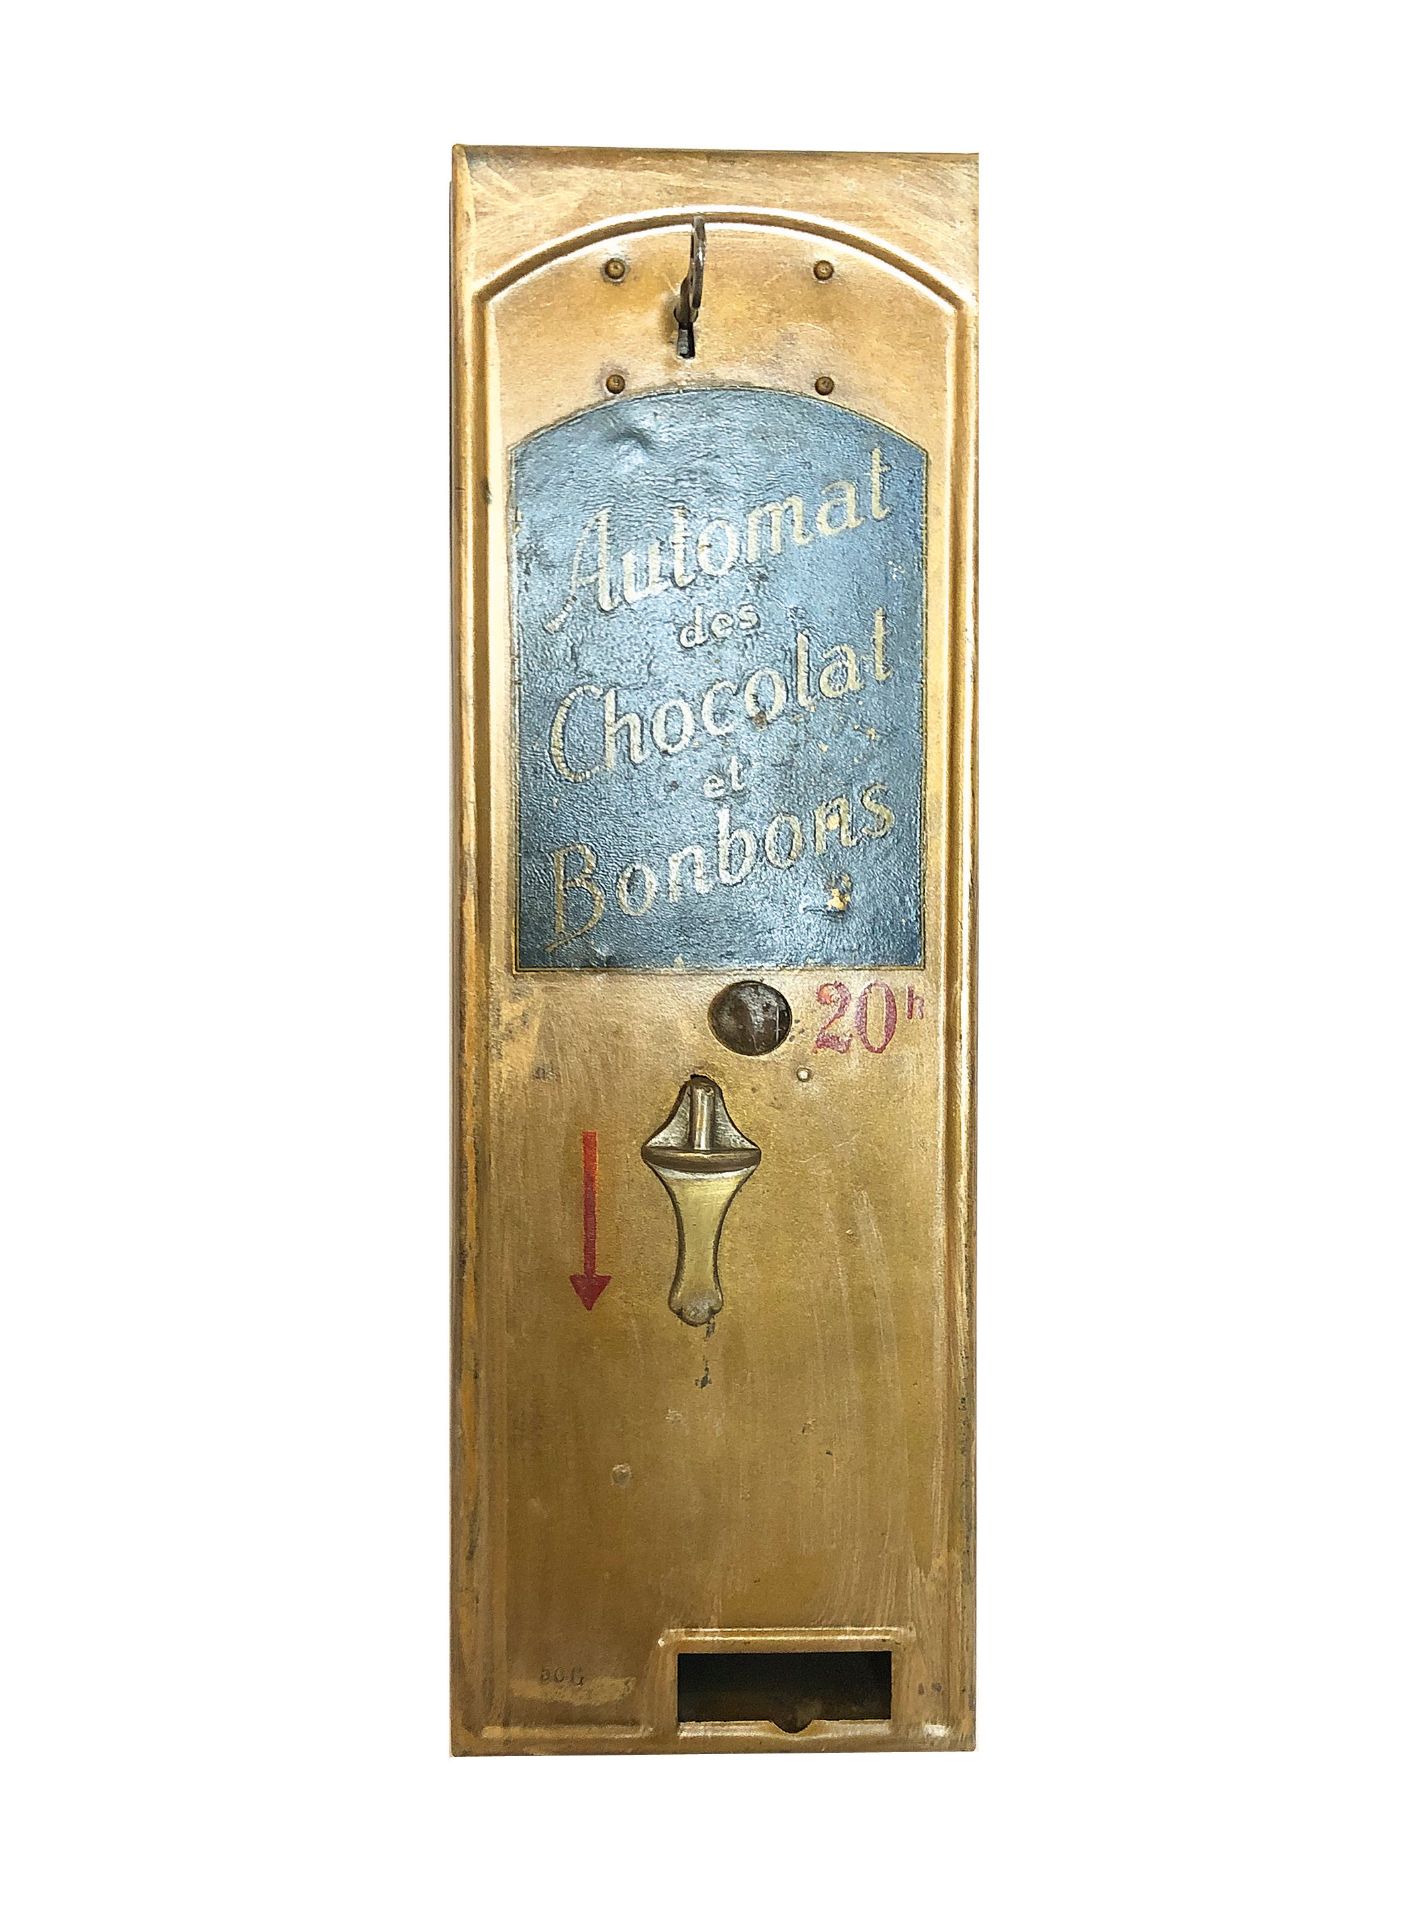 1940 French Chocolate and Candy Vending Machine - Image 2 of 4